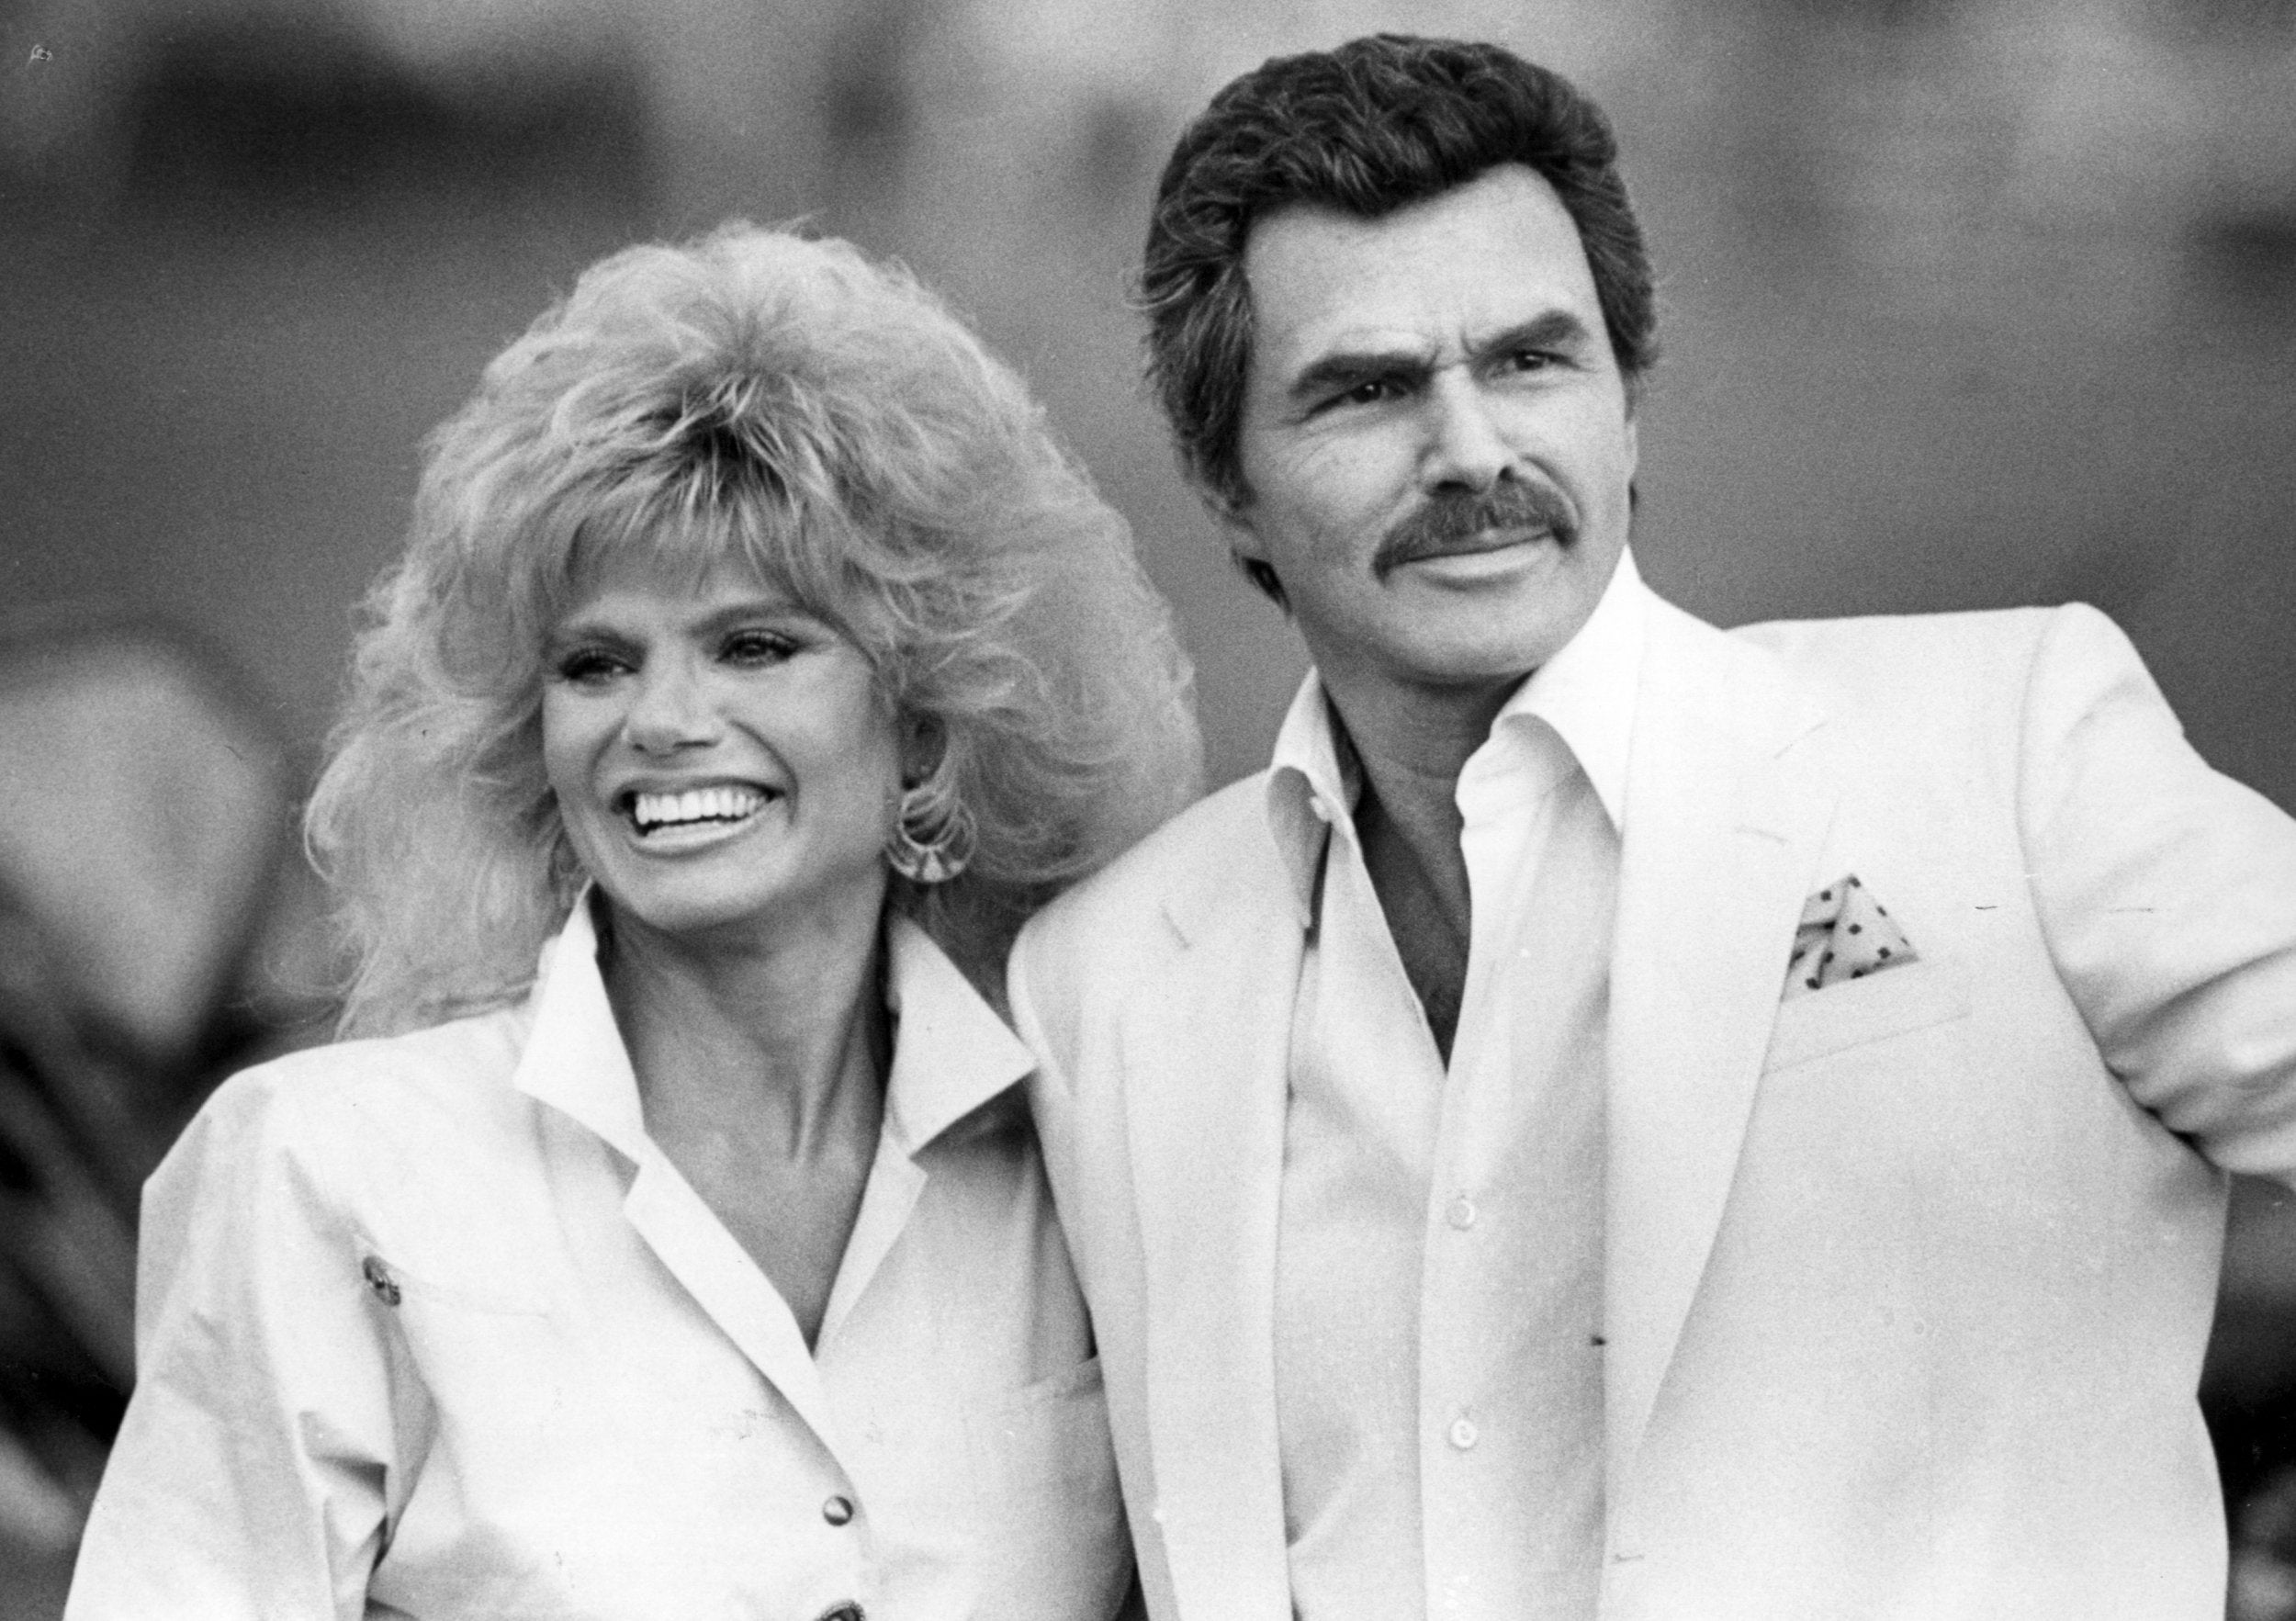 Reynolds and his second wife Loni Anderson at a polo match in 1987